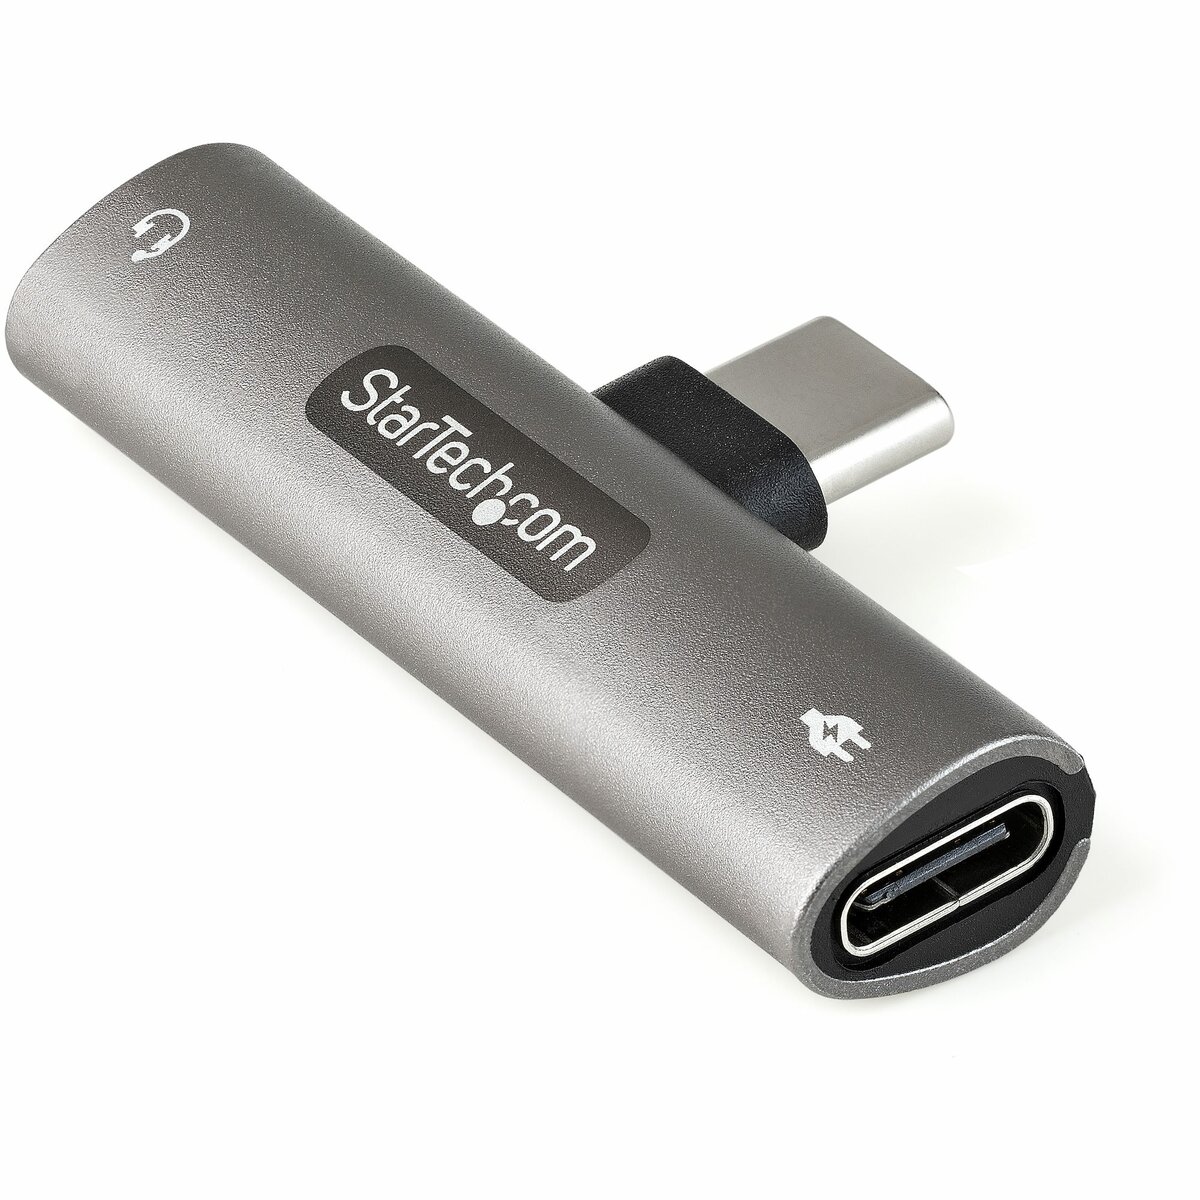 Spektakulær pedal abstraktion StarTech.com USB C Audio & Charge Adapter, USB-C Audio Adapter w/ 3.5mm  TRRS Headphone/Headset Jack and 60W USB Type-C Power Delivery Pass-through  Charger, For USB-C Phone/Tablet/Laptop - USB-C to Audio & Charging (